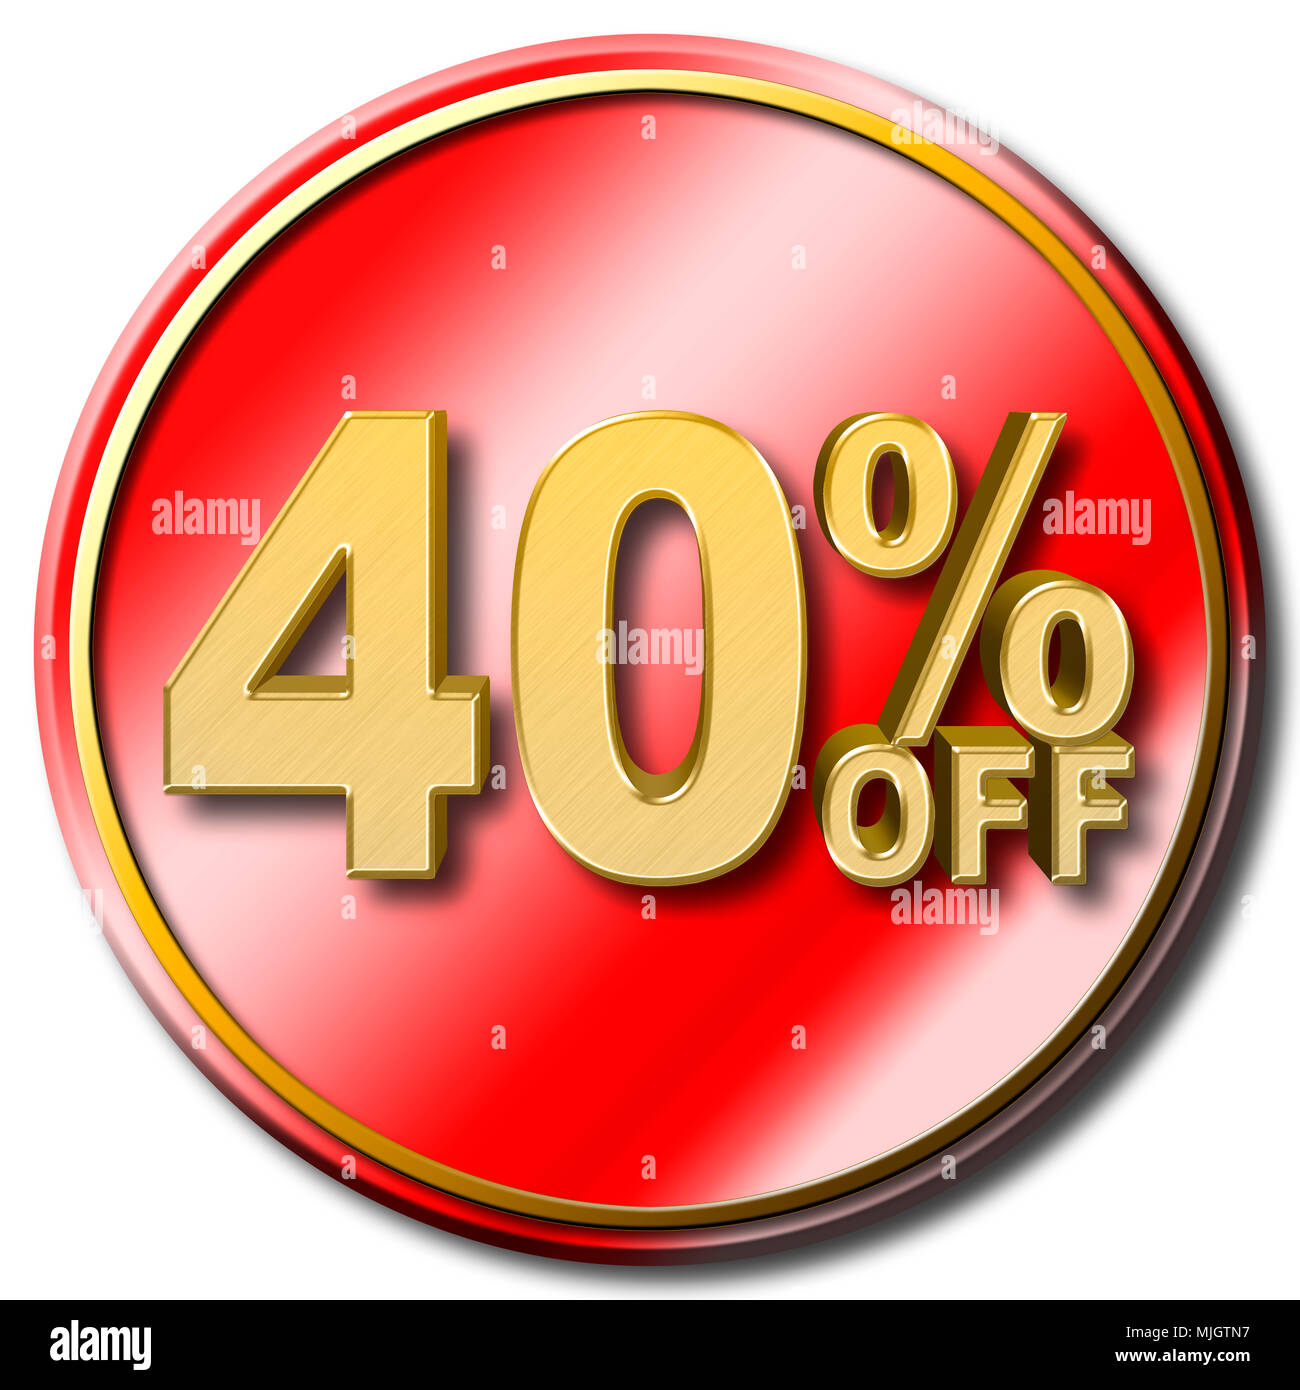 Stock Illustration - Large Golden Text: 40 Percent Off, Sale, Golden Numbers, 3D Illustration, White Background. Stock Photo